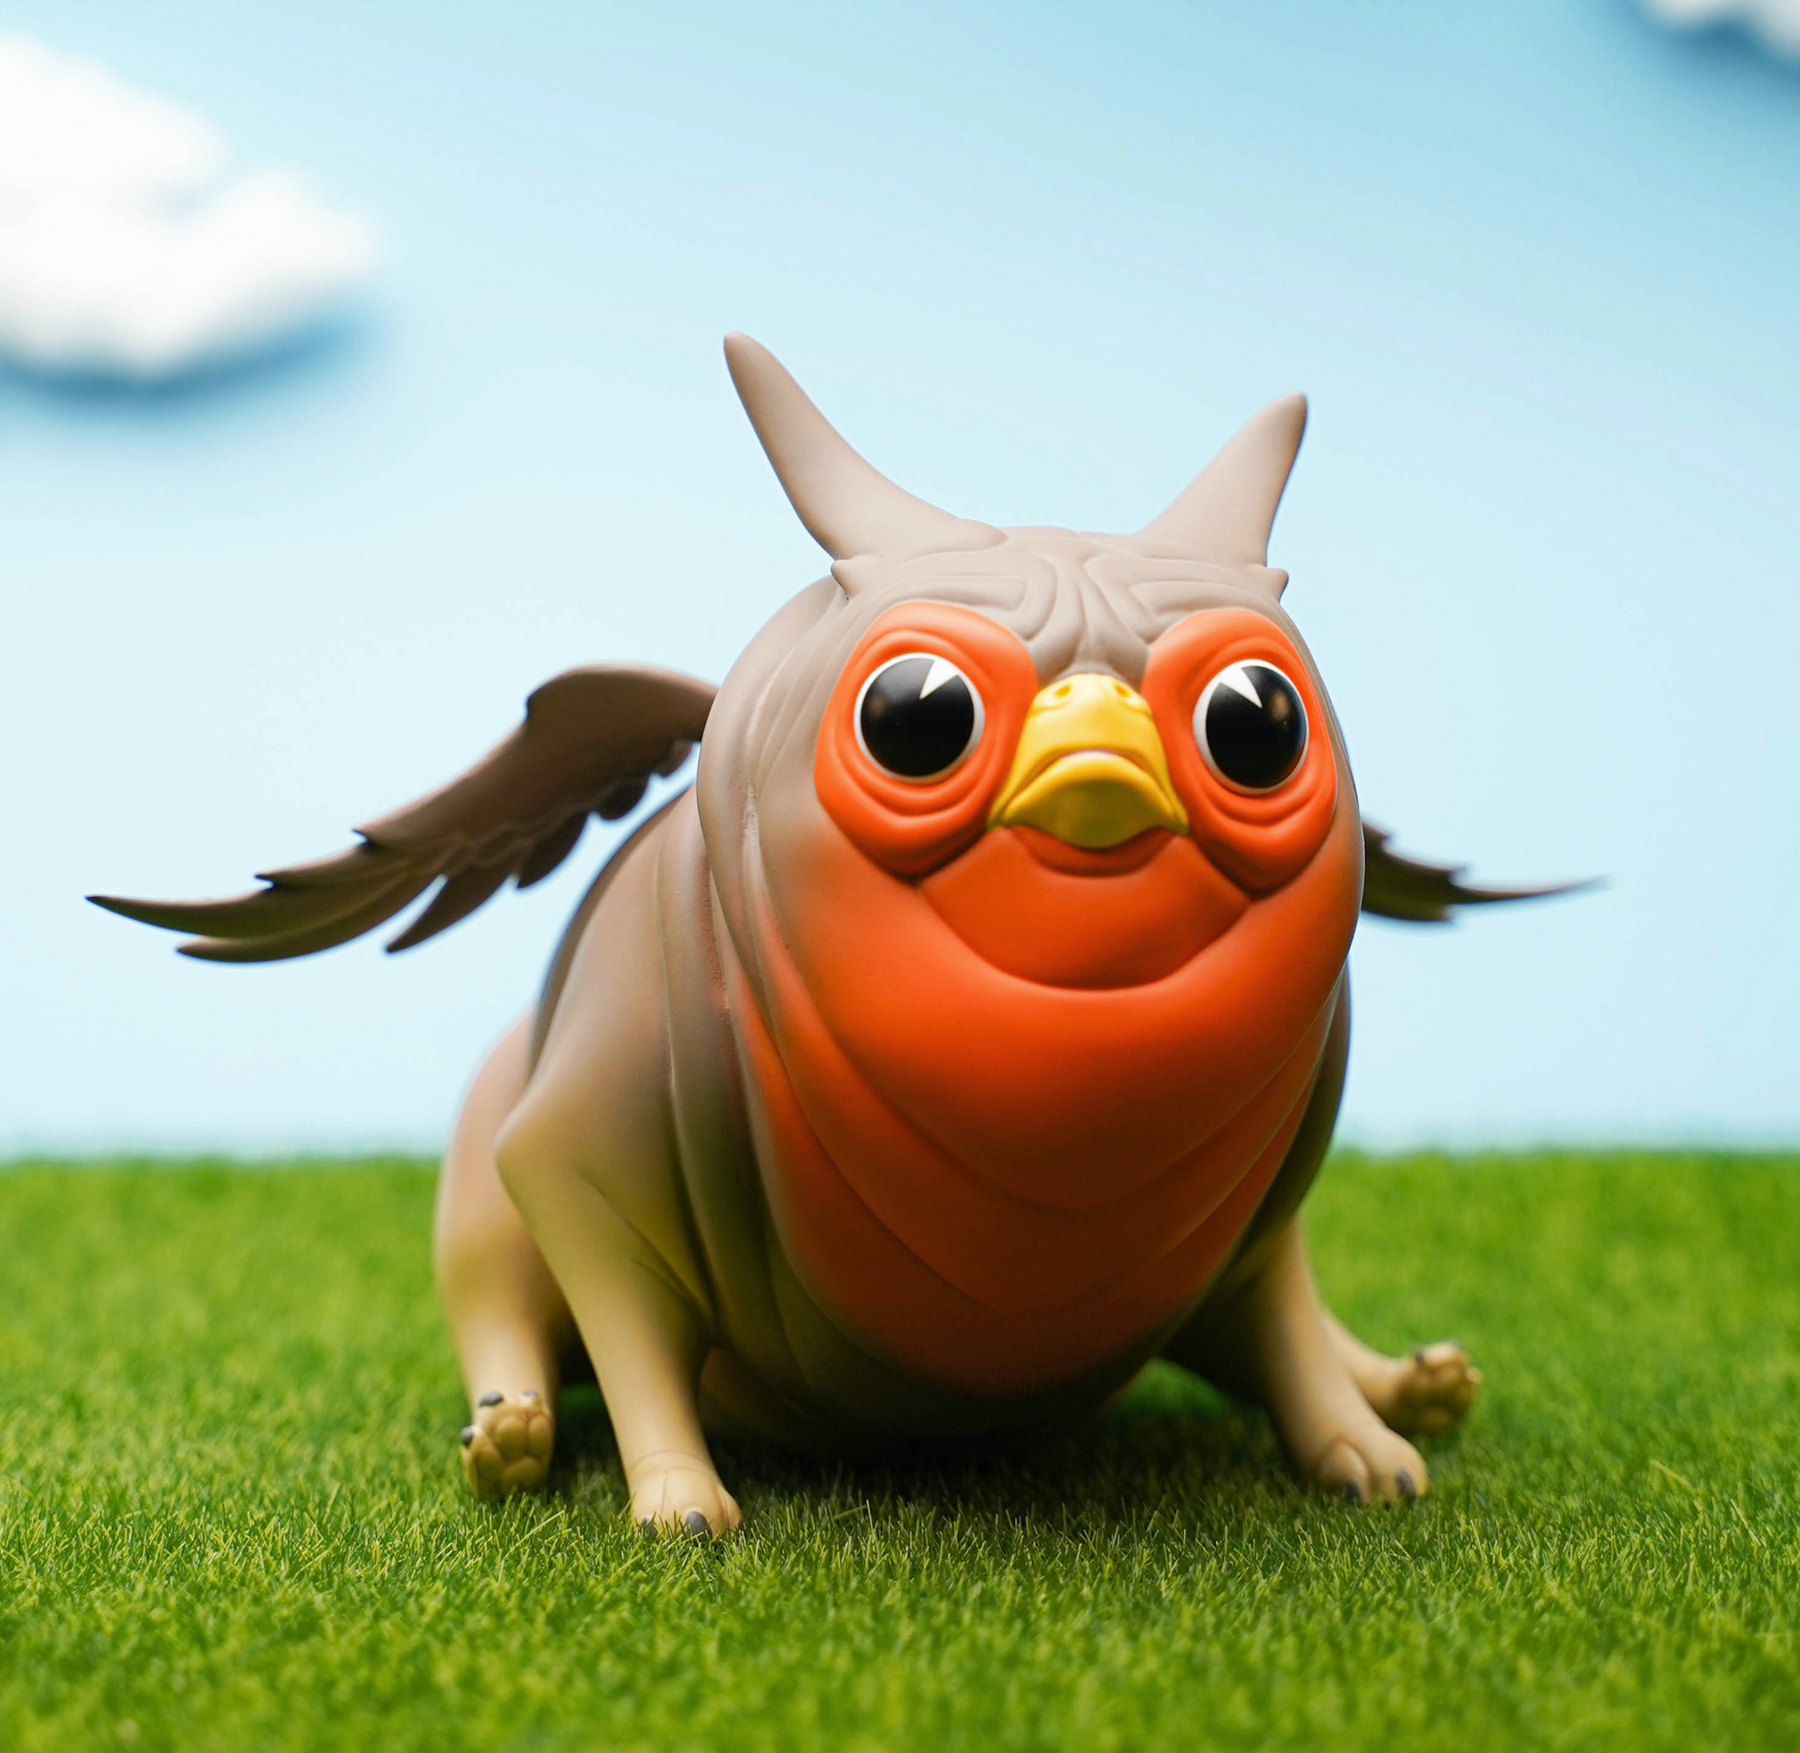 Peagle European Robin Edition 5-inch vinyl figure by PureArts Available Now ! ! !